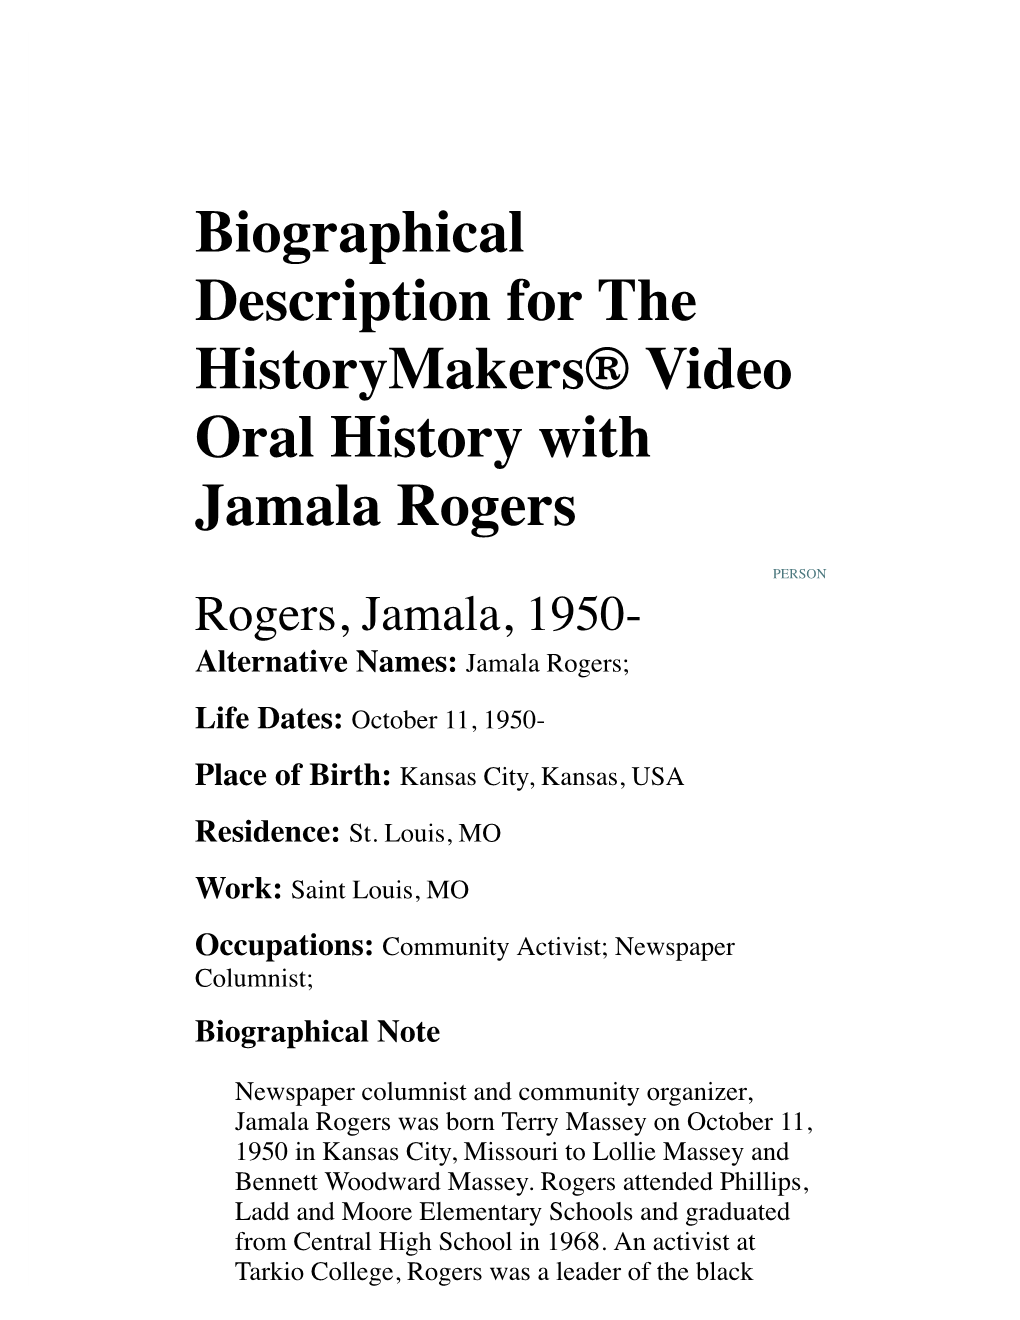 Biographical Description for the Historymakers® Video Oral History with Jamala Rogers